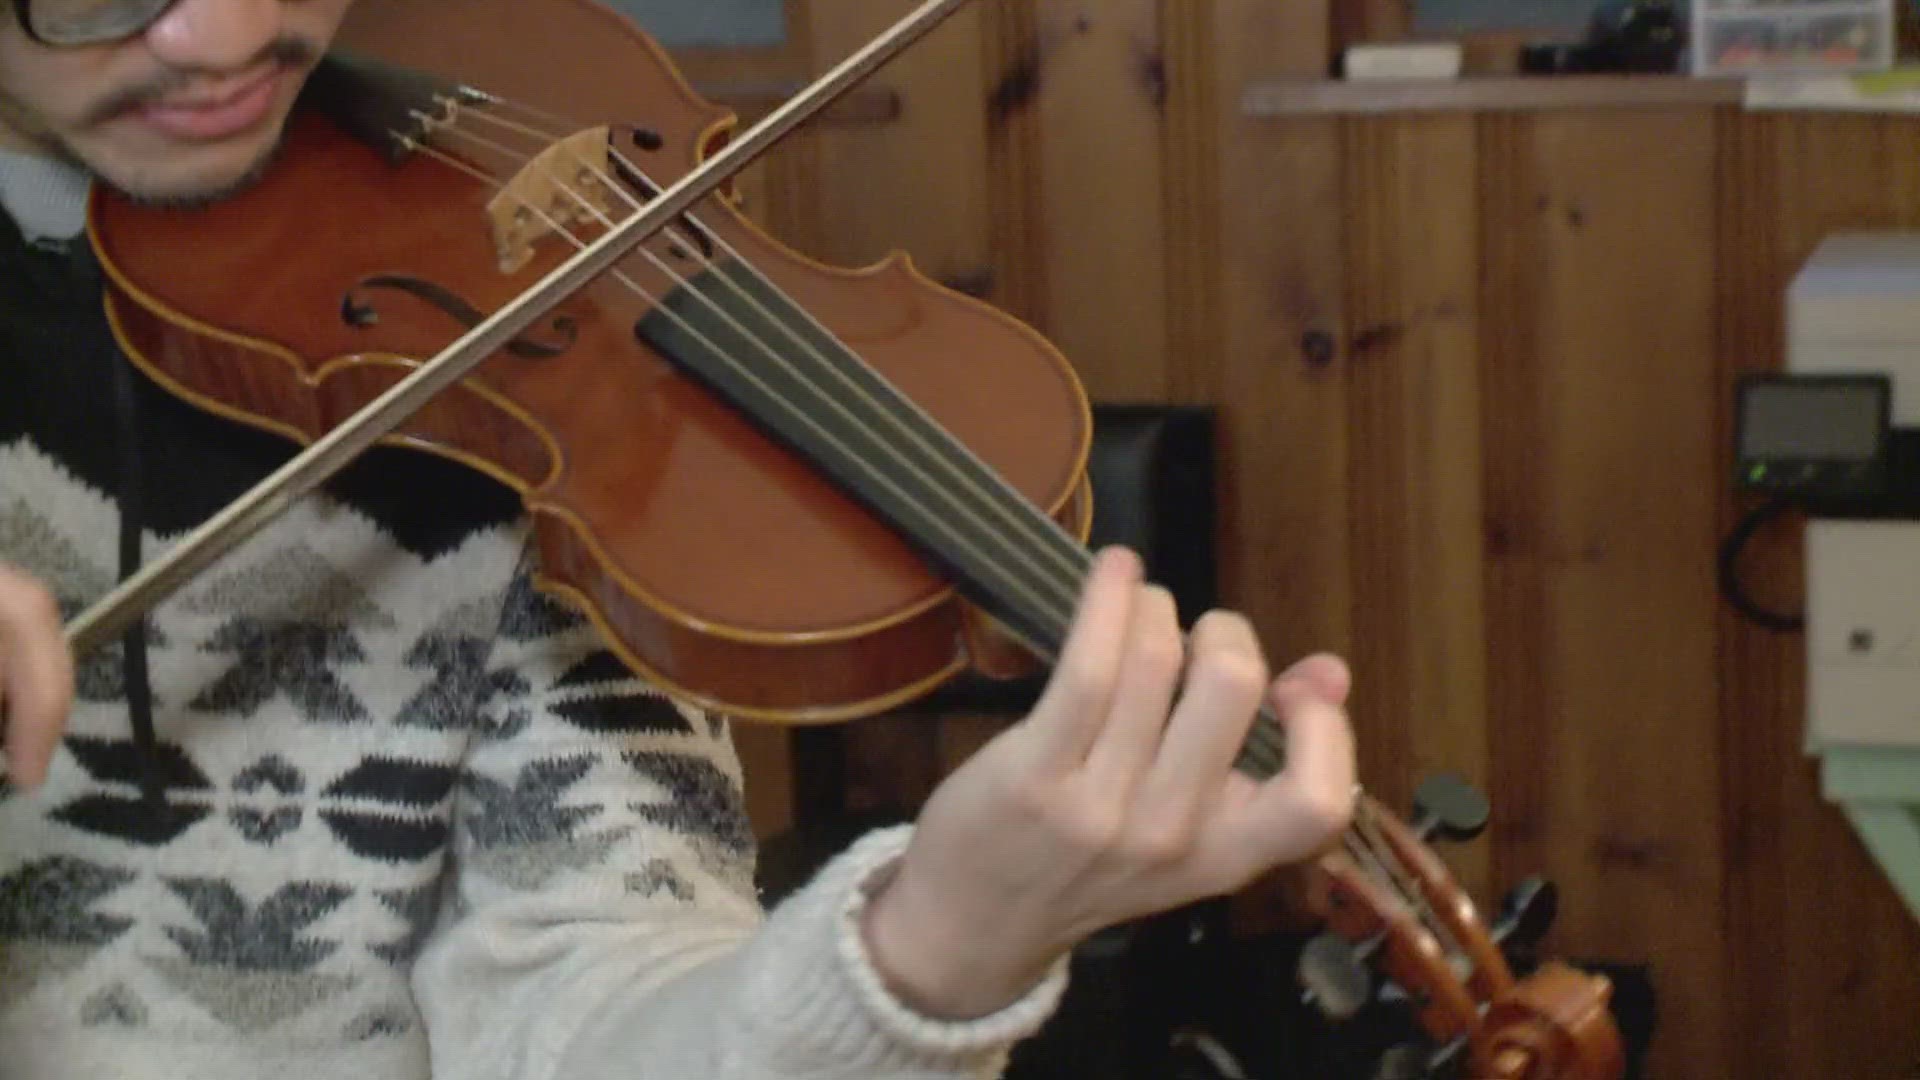 Allen Choo's custom made violin is one of a kind and cost him thousands of dollars to purchase.